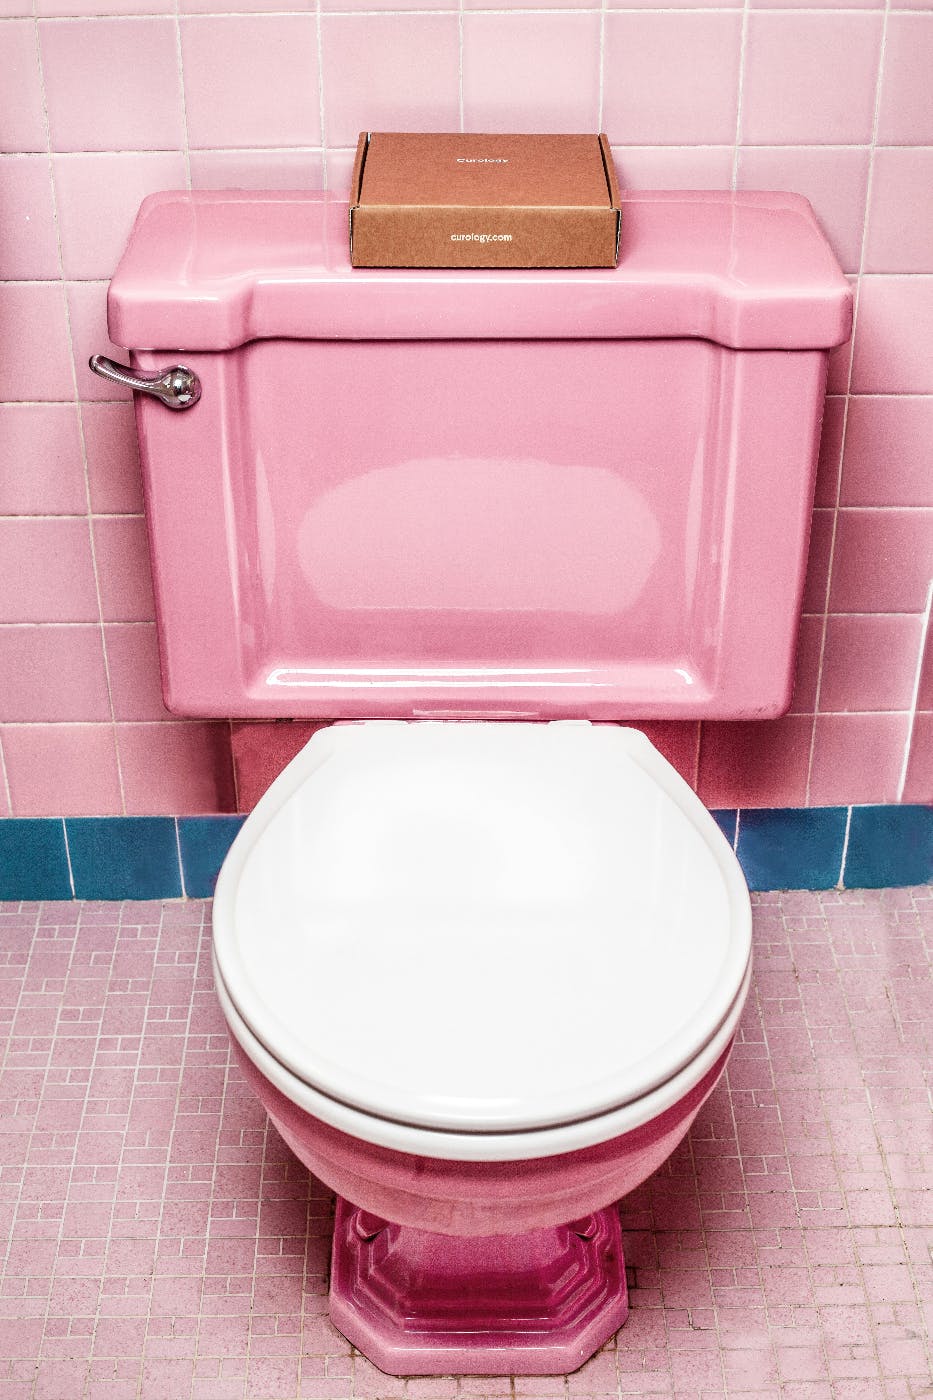 A pink toilet